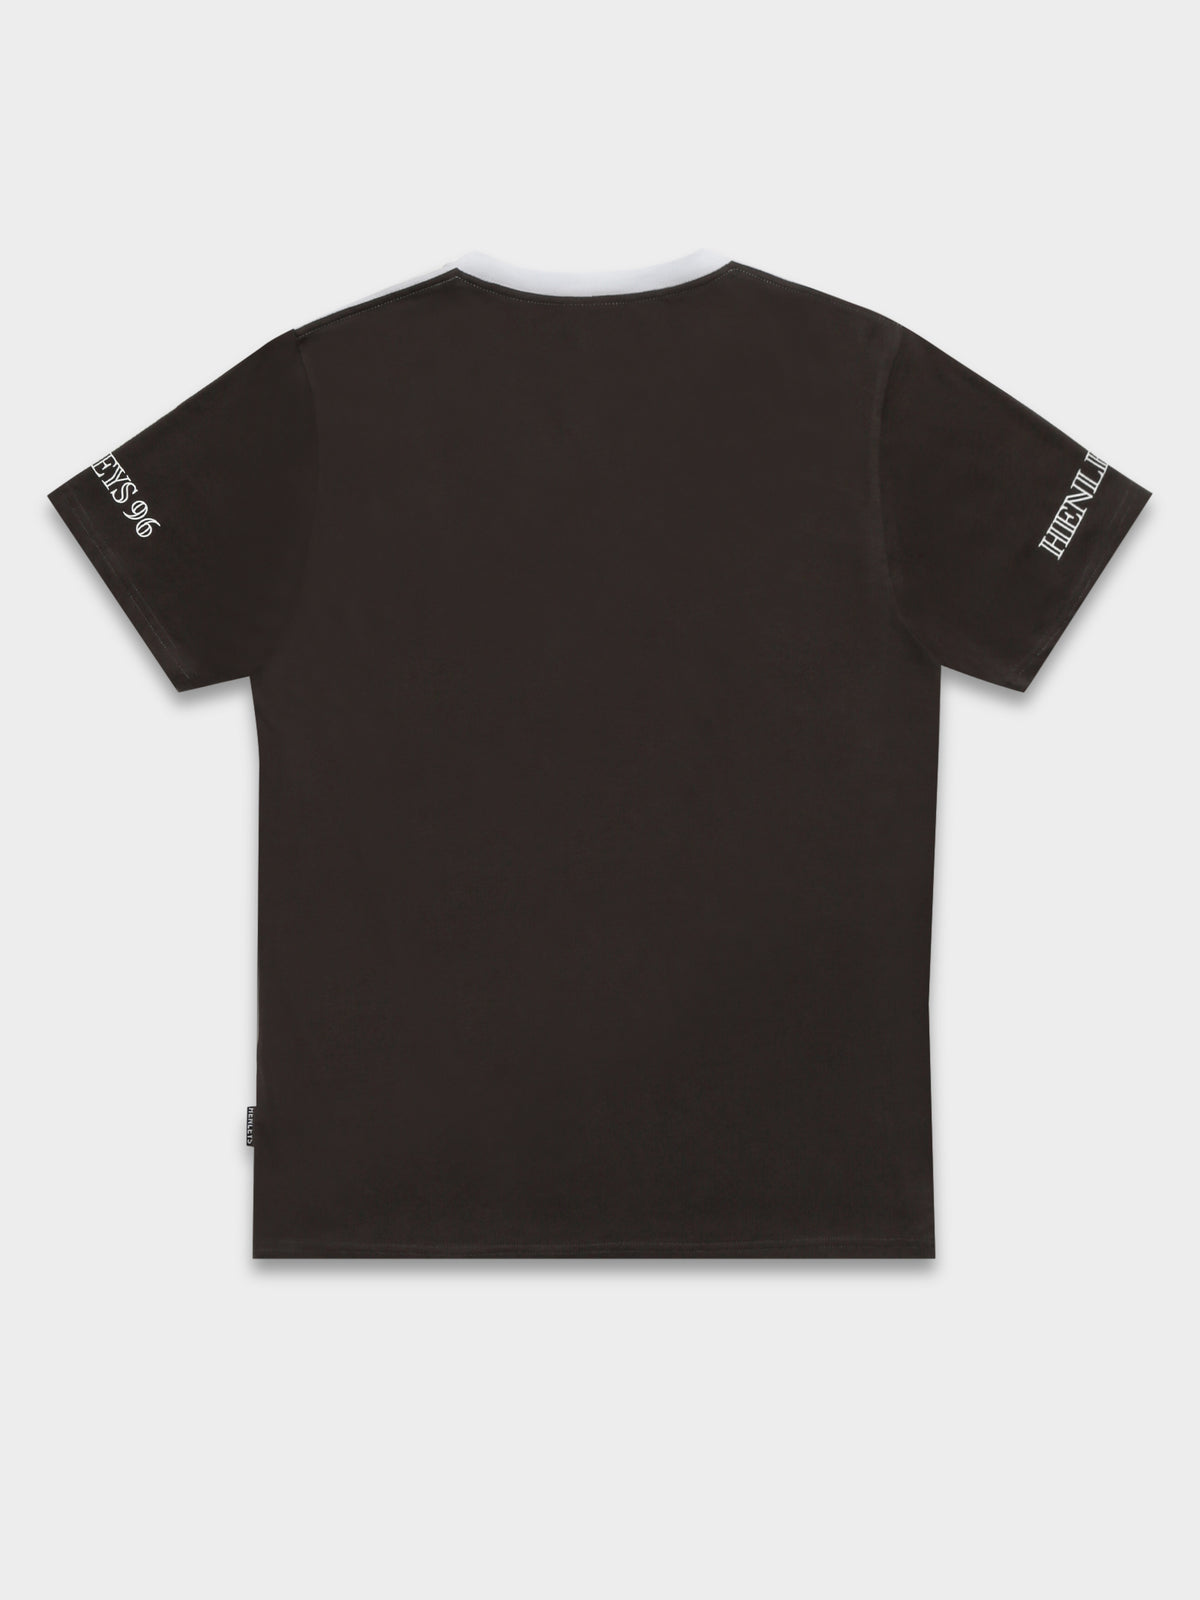 Whistle T-Shirt in Coal